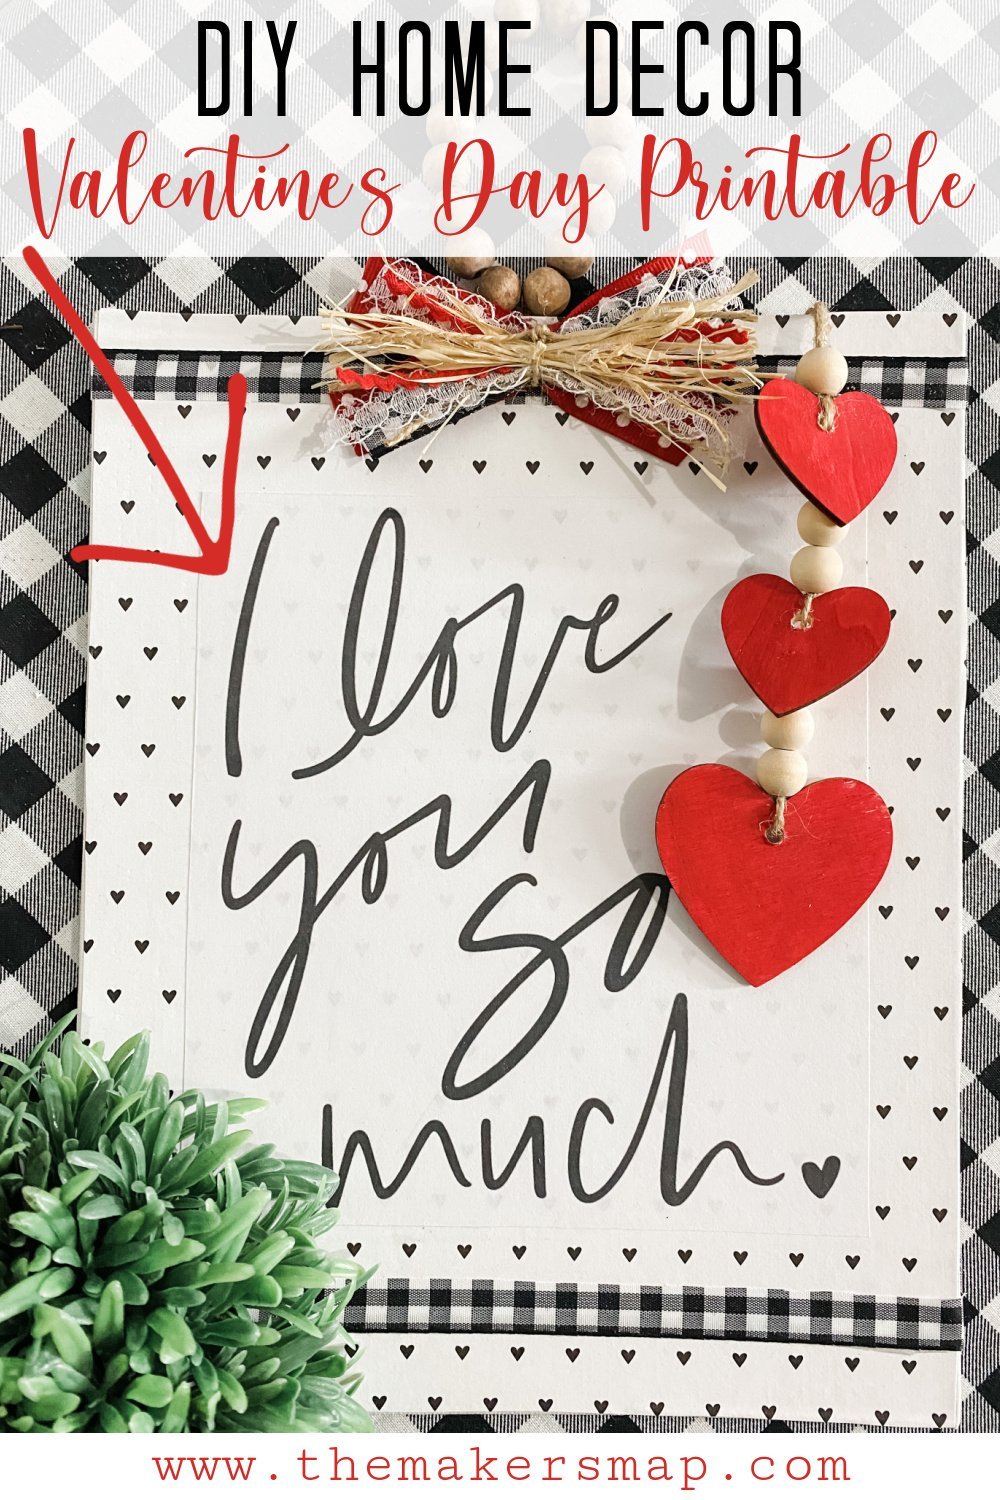 DIY Home Decor with FREE Valentine's Day Printable